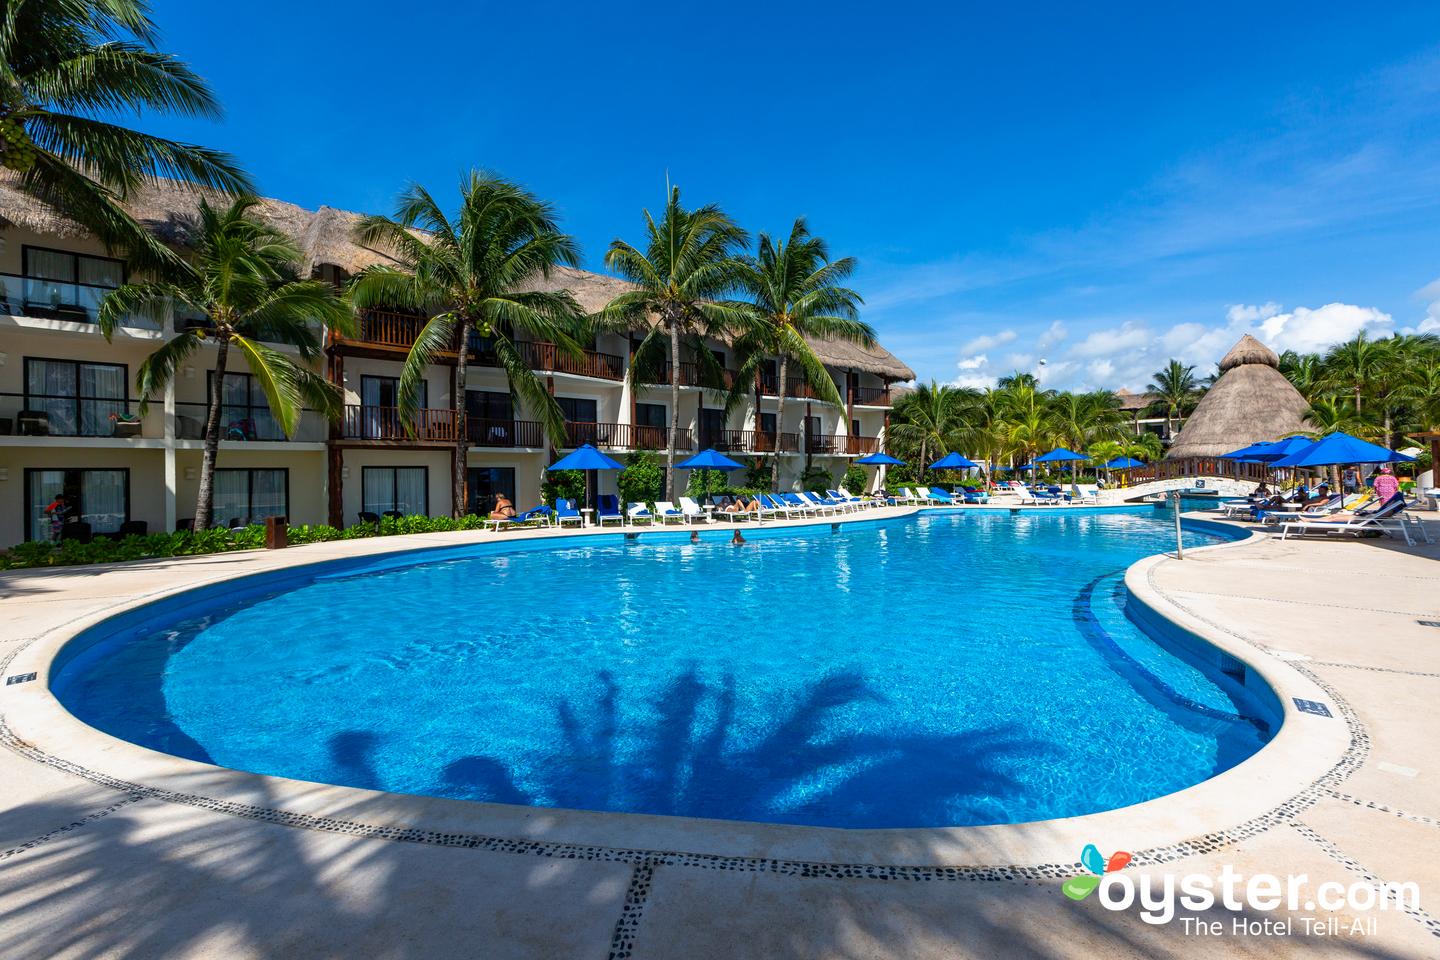 THE REEF COCO BEACH: Book at the best price